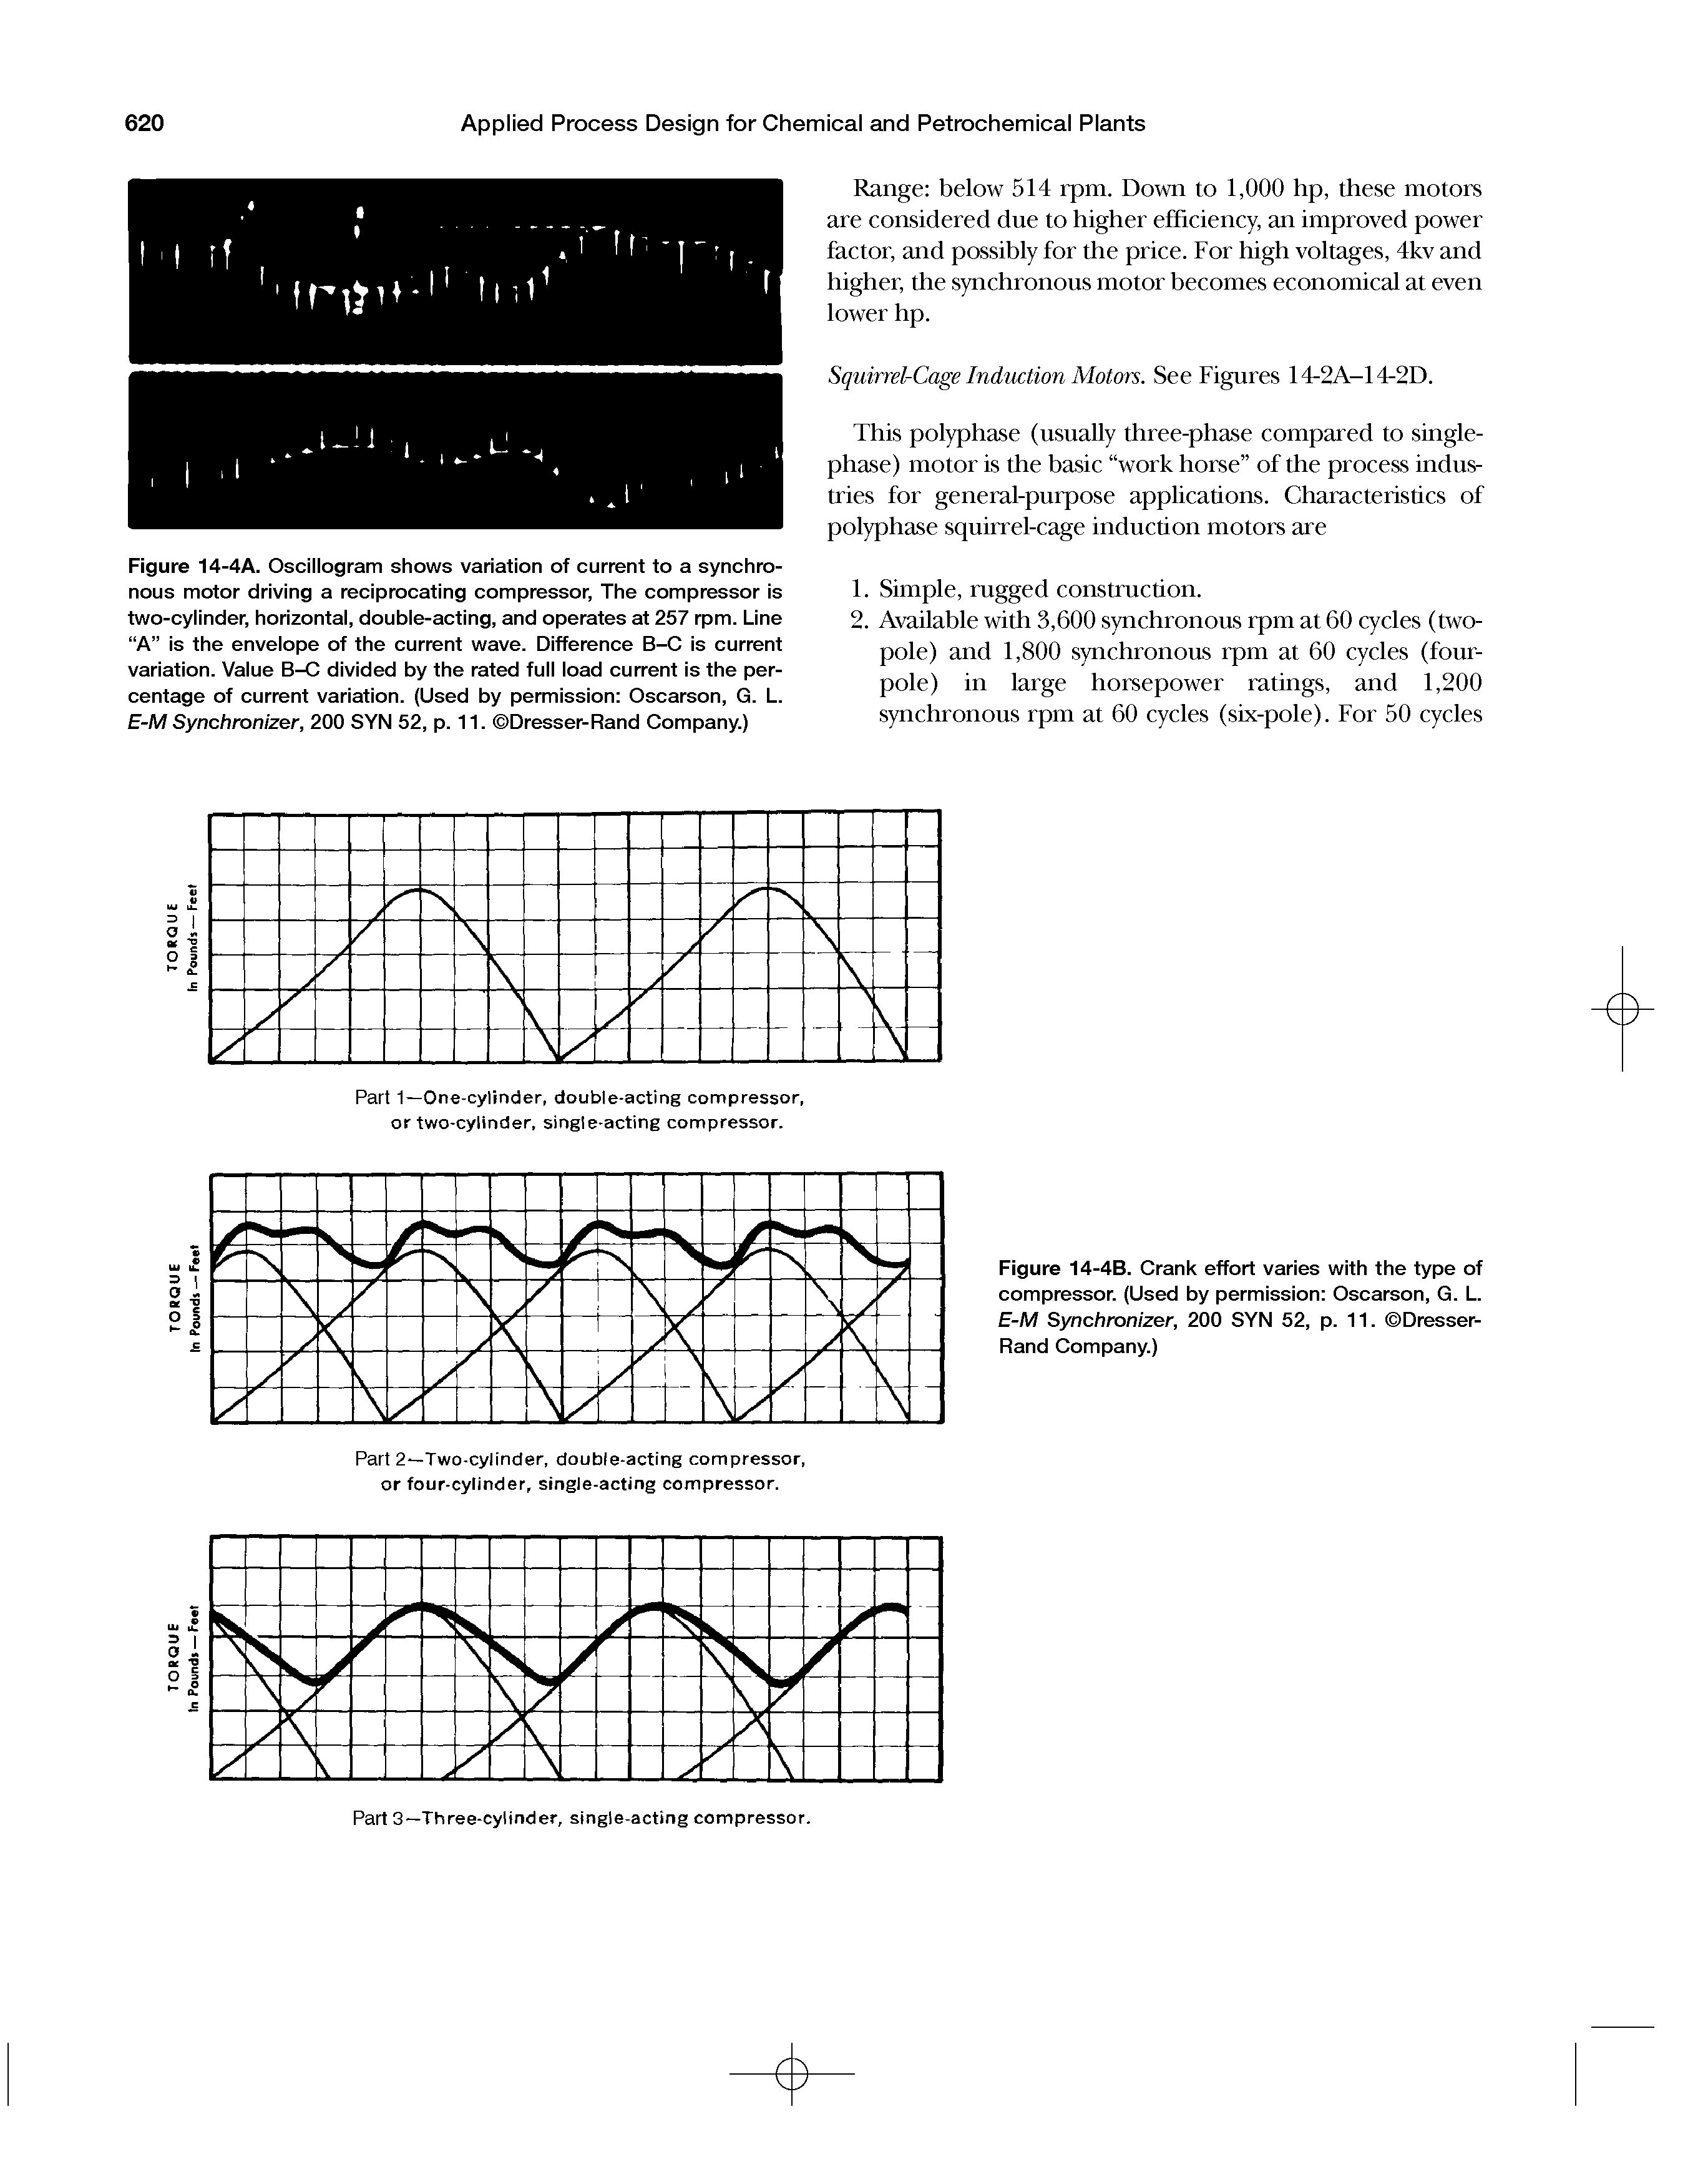 Figure 14-4A. Oscillogram shows variation of current to a synchronous motor driving a reciprocating compressor, The compressor is two-cylinder, horizontal, double-acting, and operates at 257 rpm. Line A is the envelope of the current wave. Difference B-C is current variation. Value B-C divided by the rated full load current is the percentage of current variation. (Used by permission Oscarson, G. L. E-M Synchronizer, 200 SYN 52, p. 11. Dresser-Rand Company.)...